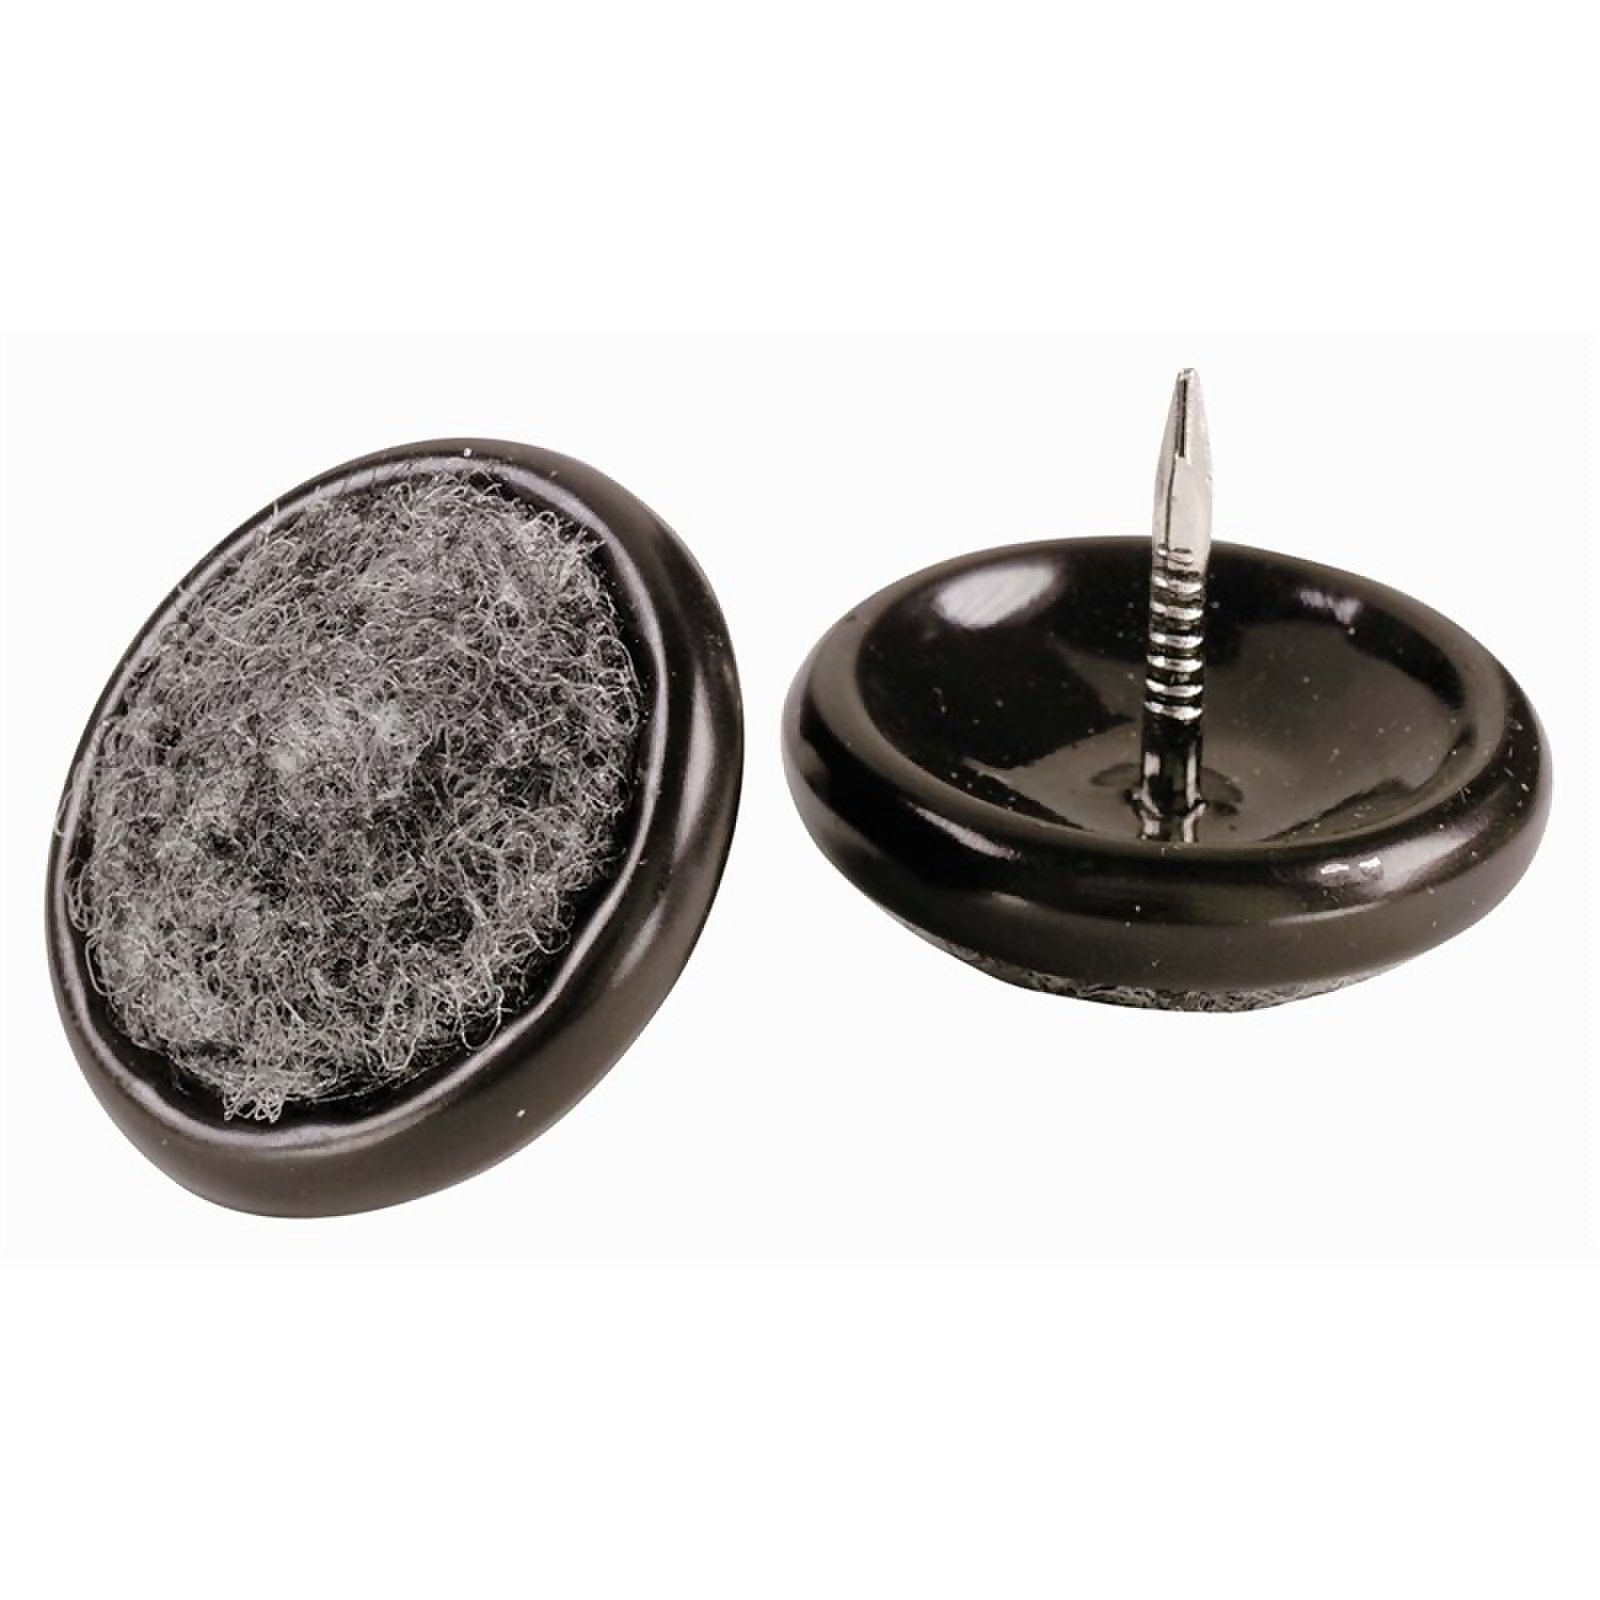 Photo of Nail-in Carpet Base - 25mm - 4 Pack